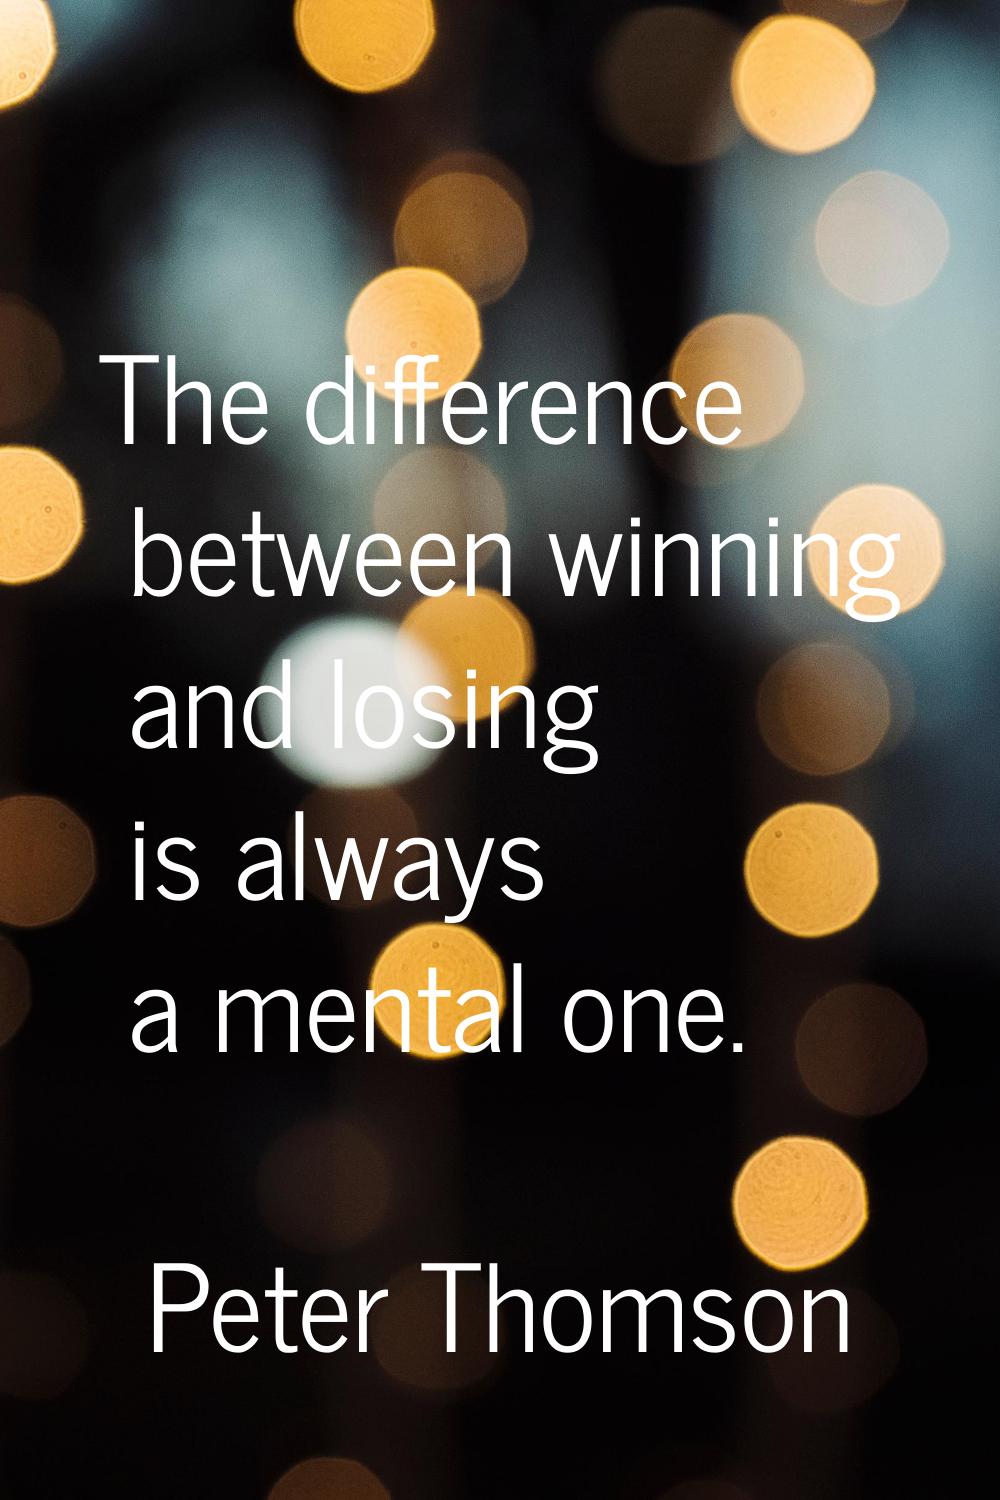 The difference between winning and losing is always a mental one.